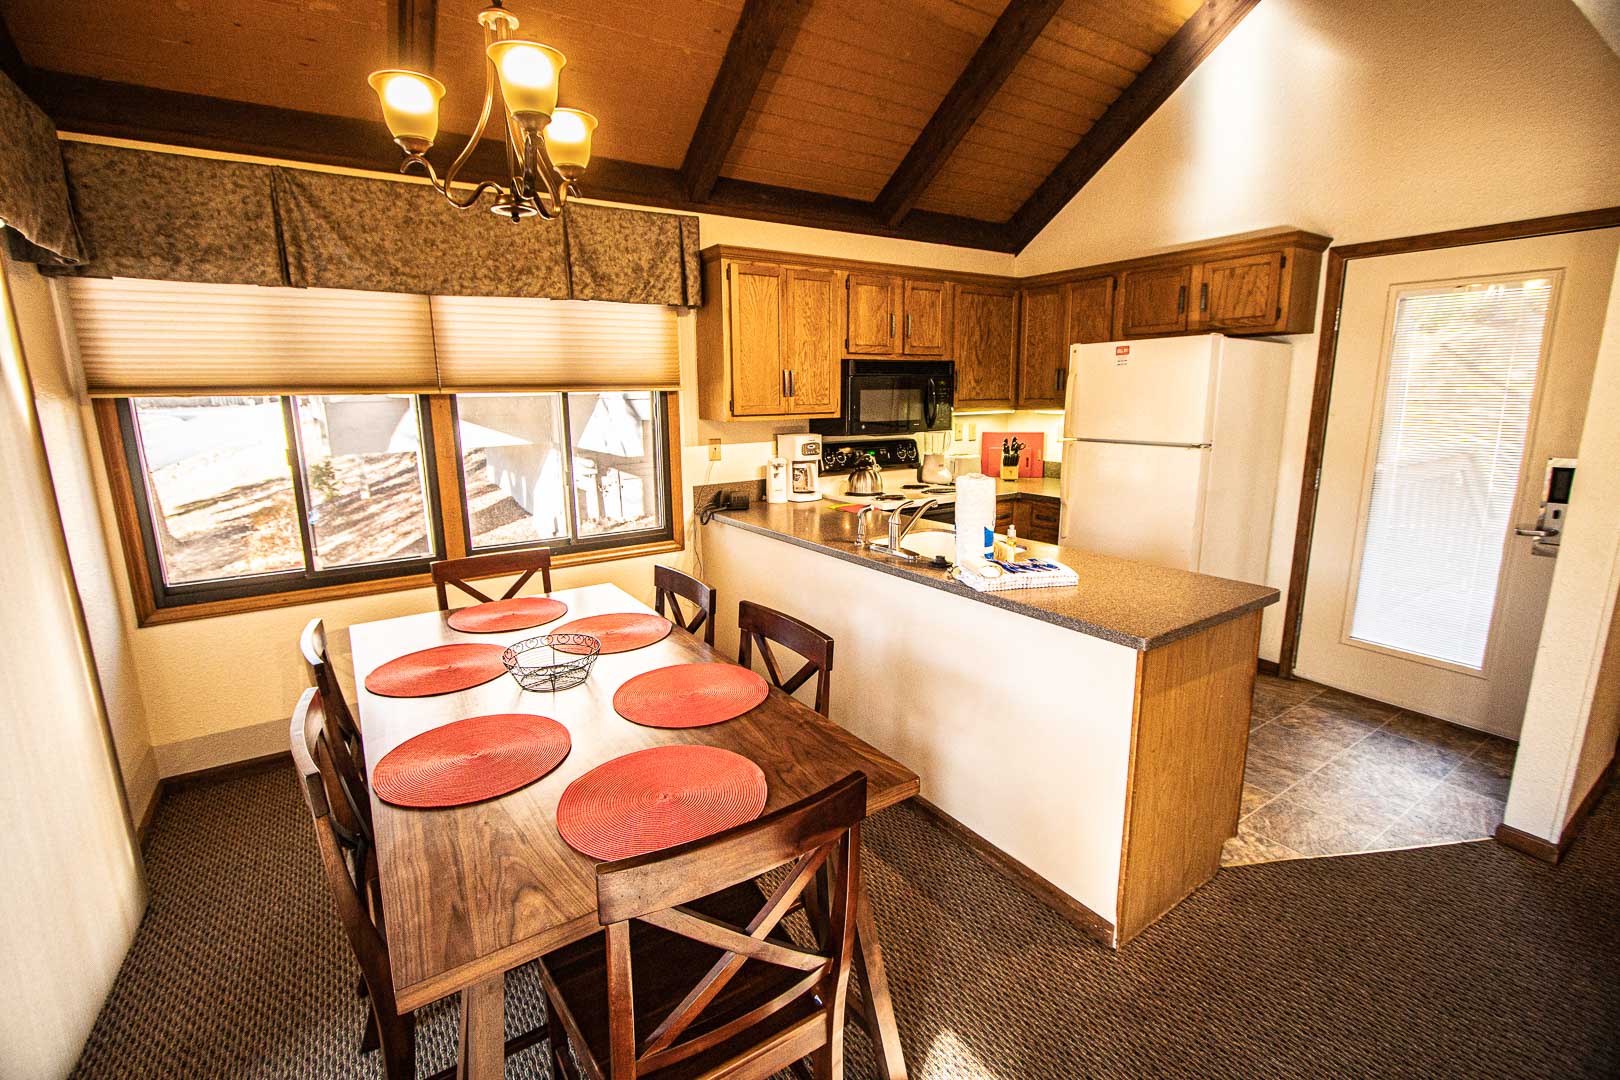 A spacious dining and kitchen area at VRI's Mountain Loft Resort in North Carolina.